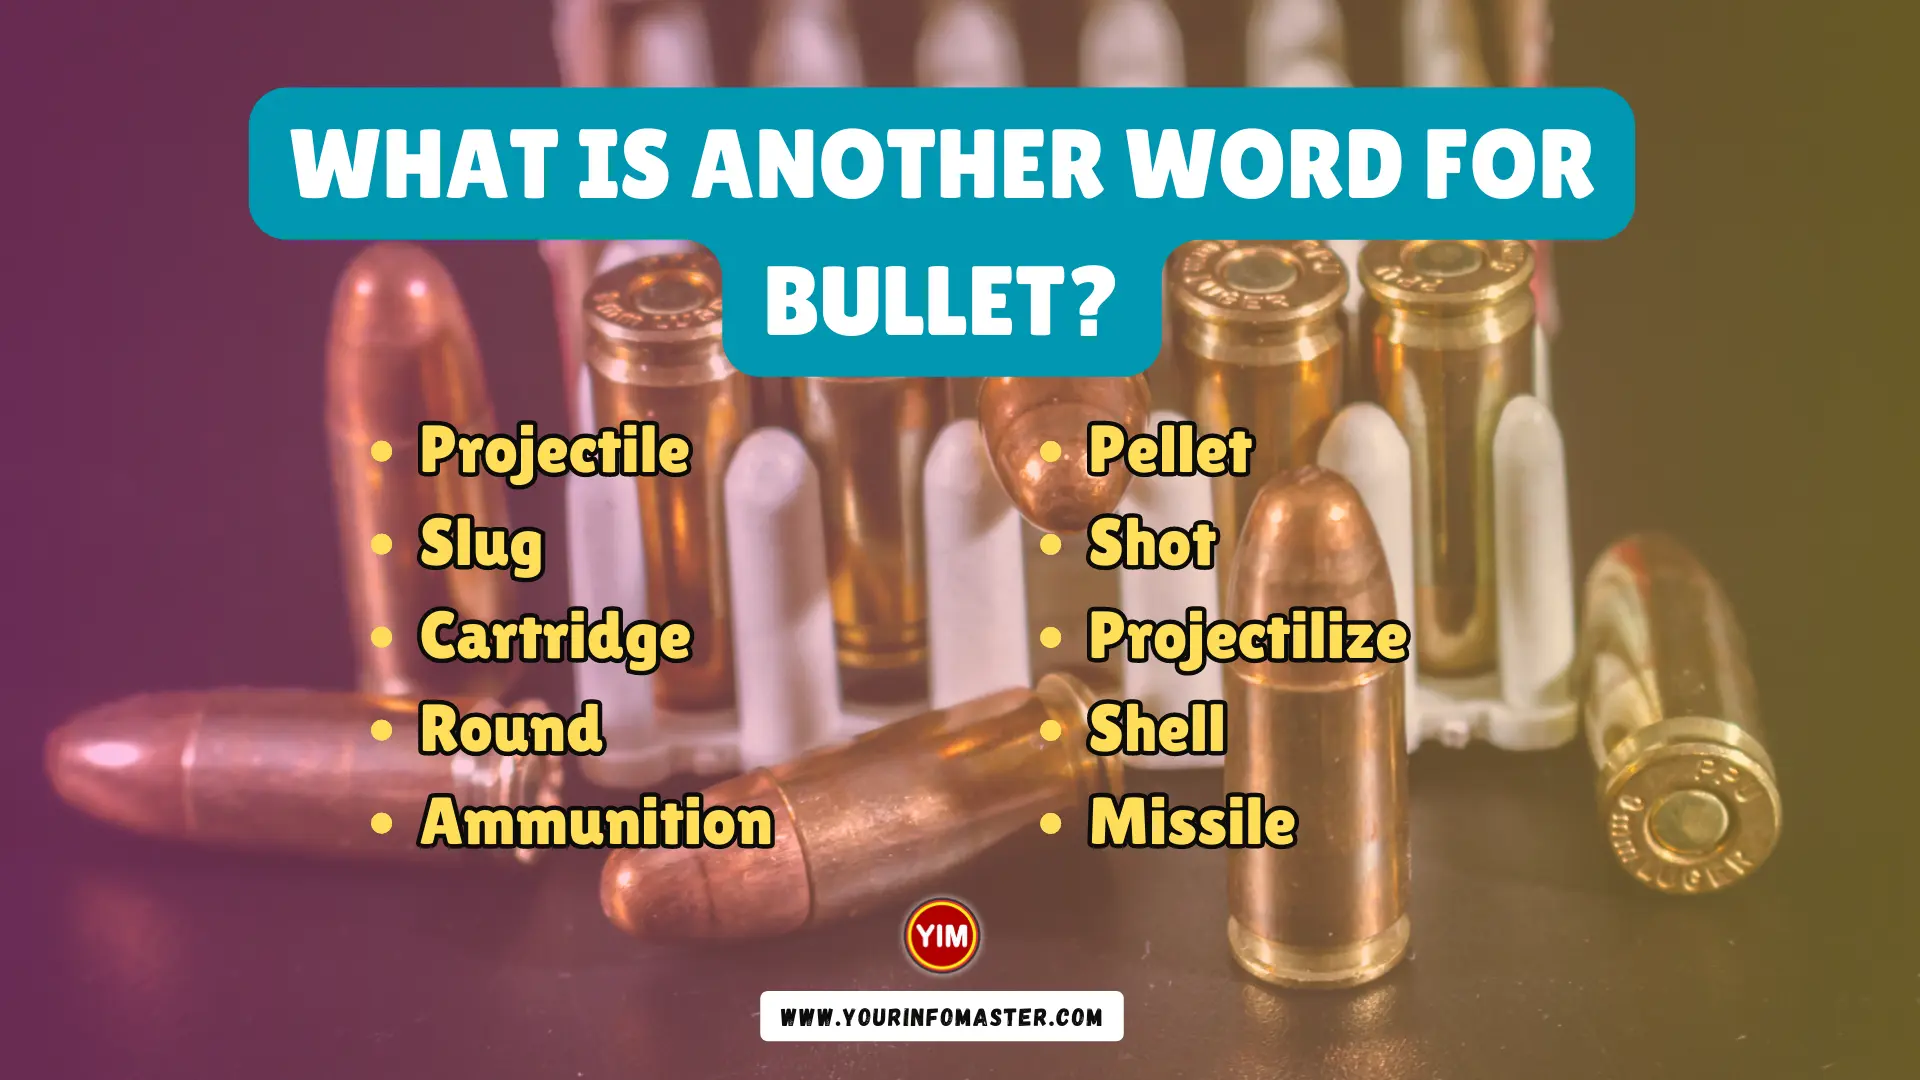 What is another word for Bullet